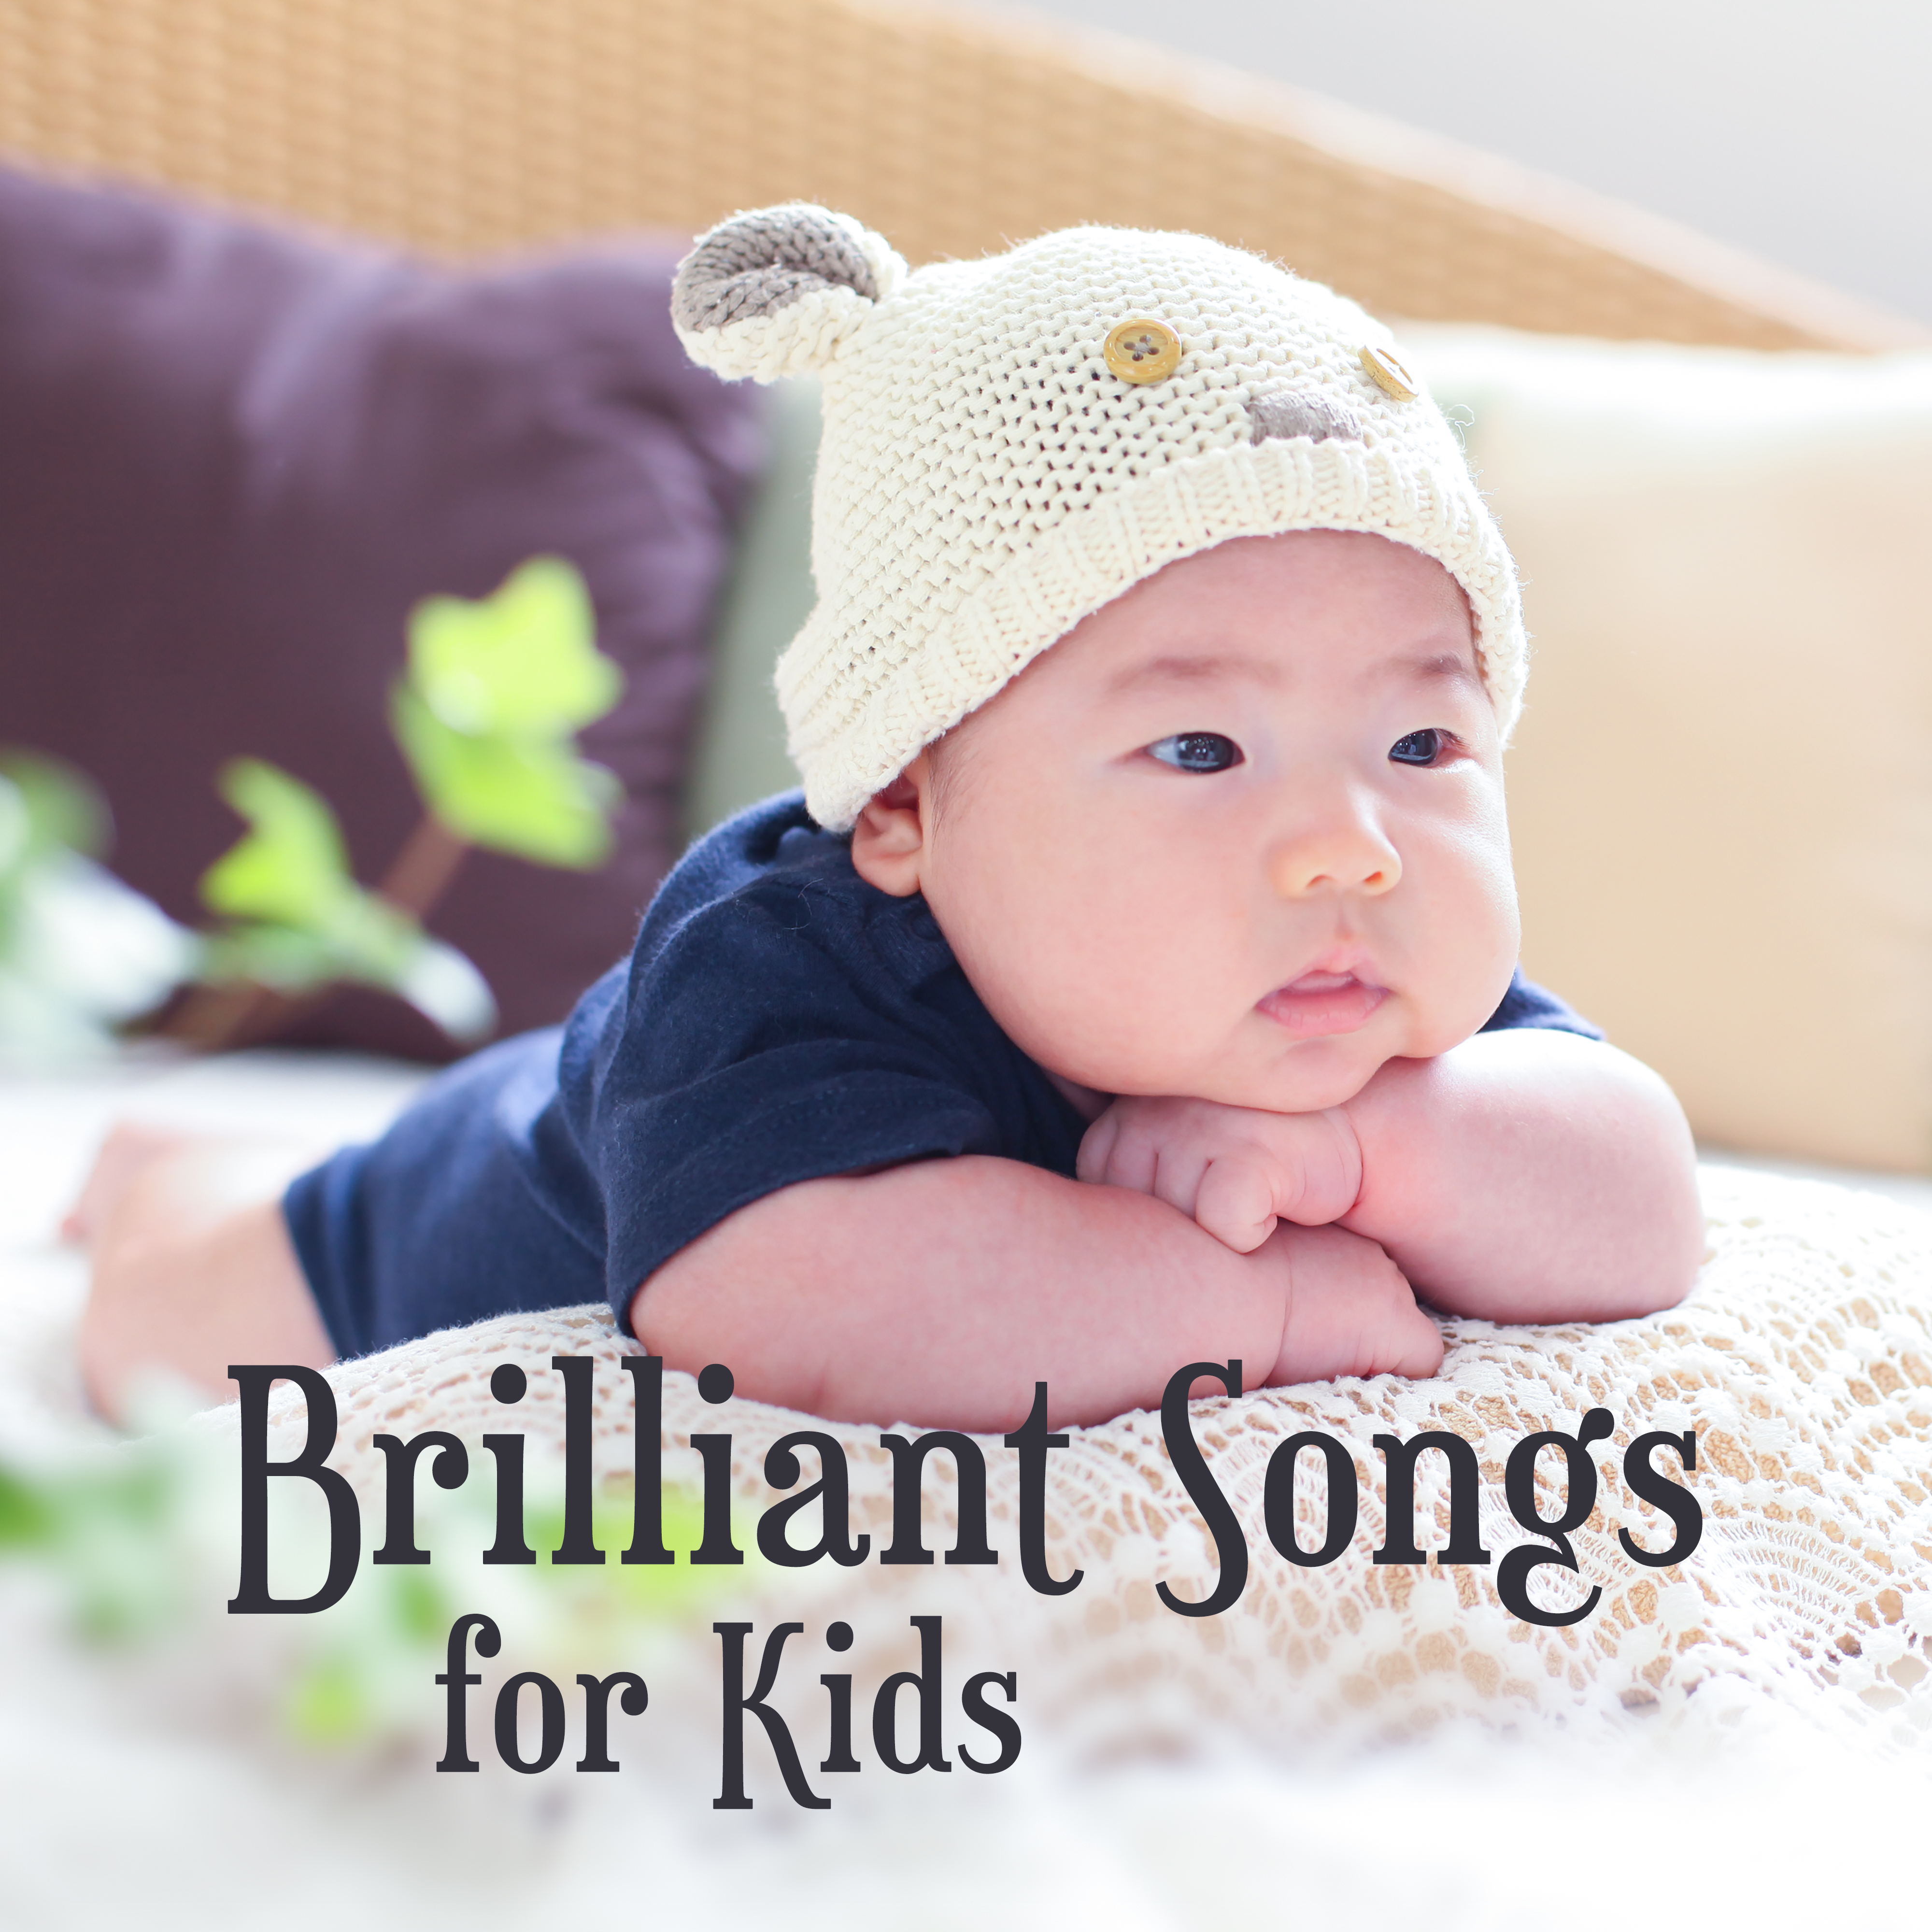 Brilliant Songs for Kids  Music for Babies, Classical Noise, Smart, Little Baby, Clear Mind Your Child, Satie, Schubert